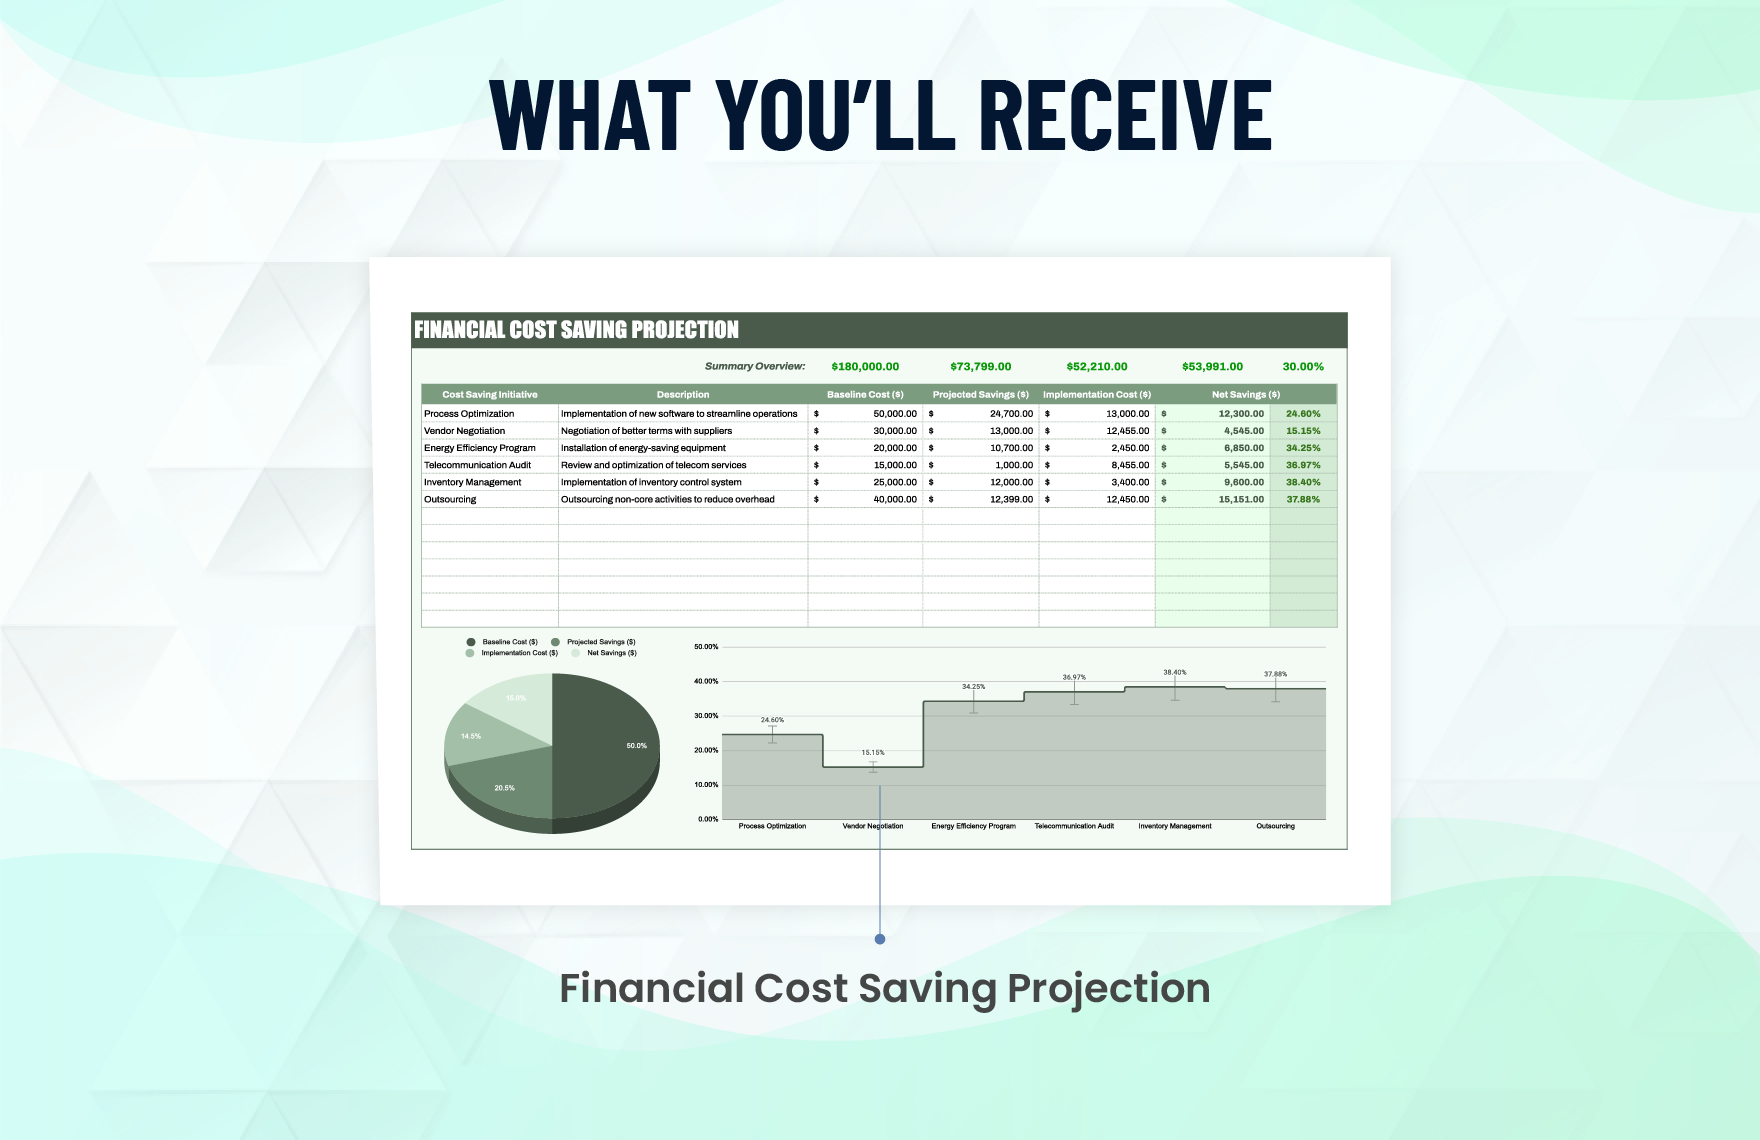 Financial Cost Saving Projection Template